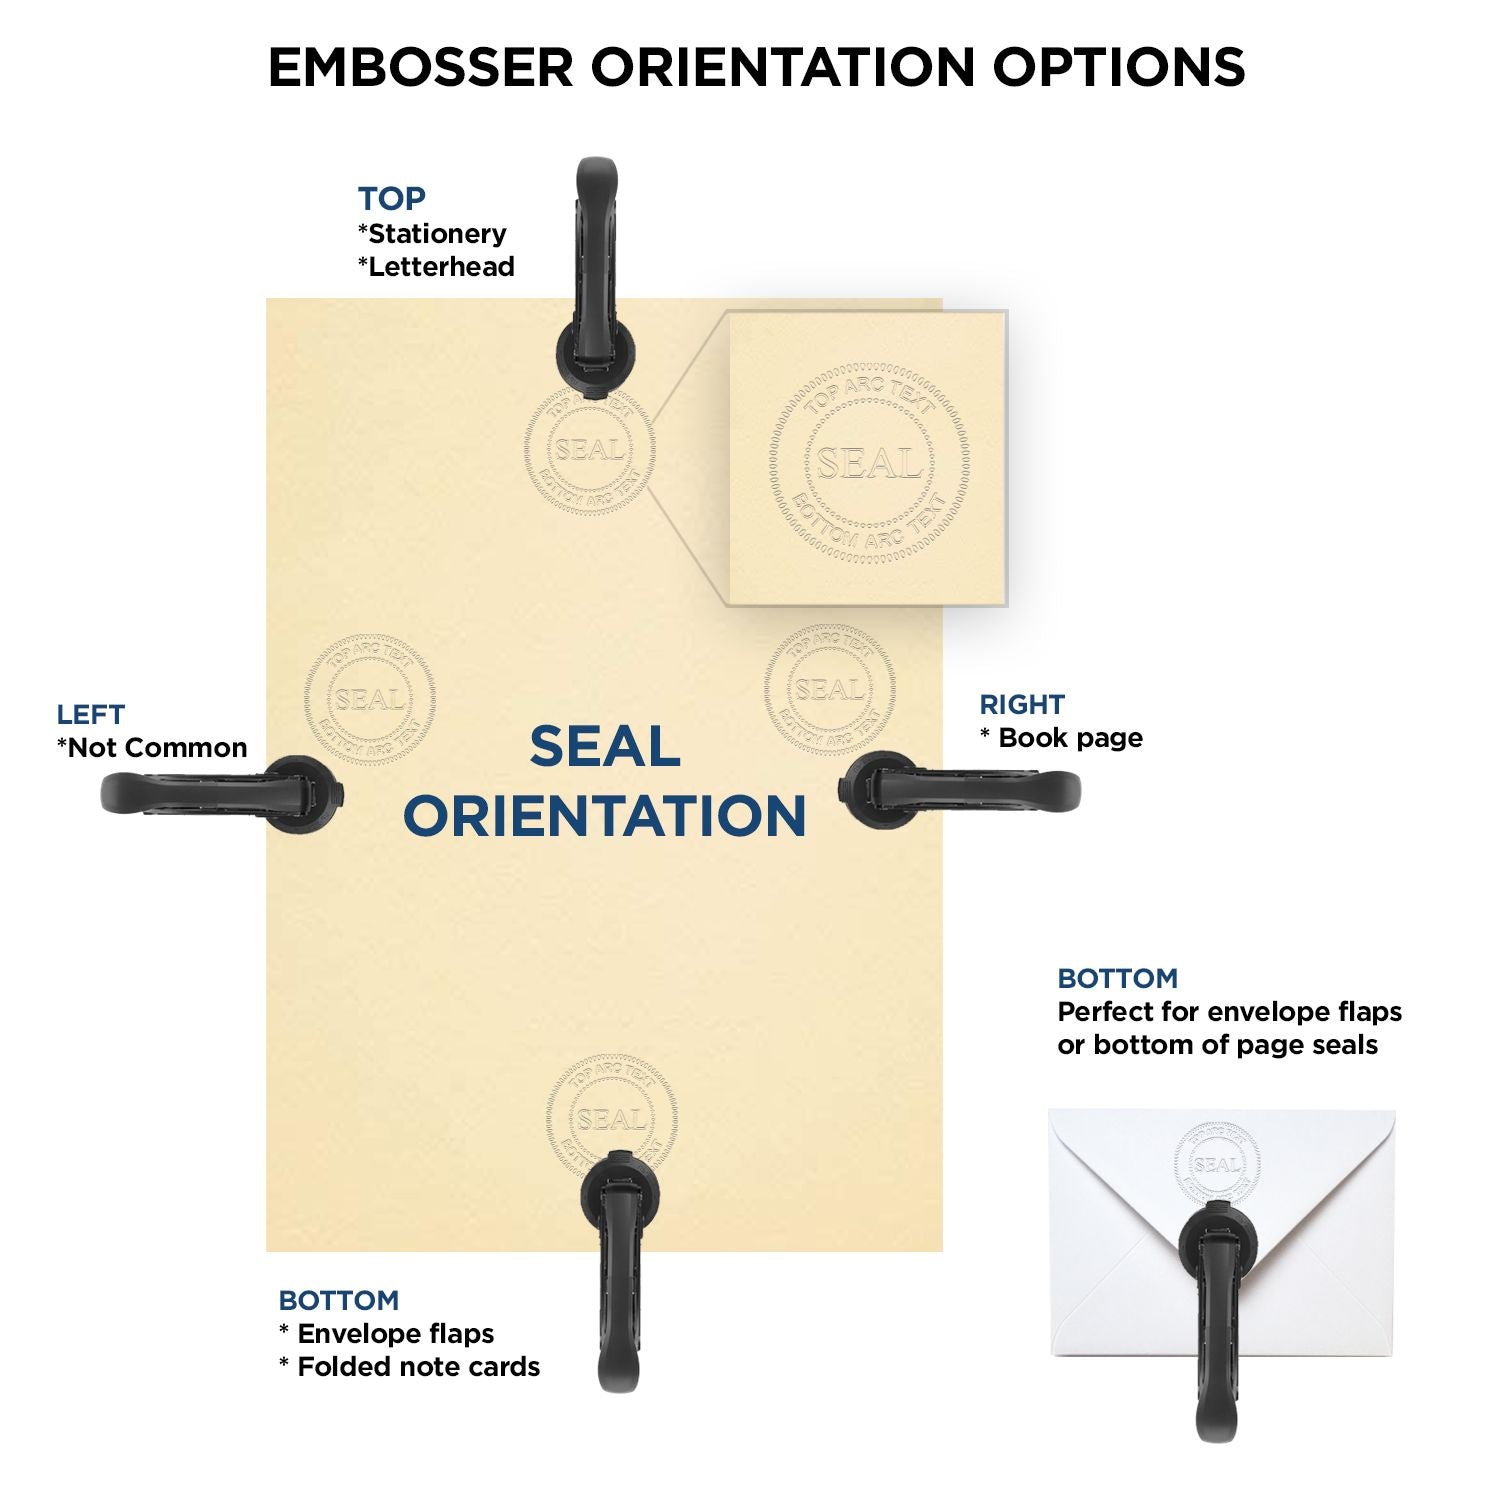 An infographic for the State of Arkansas Long Reach Architectural Embossing Seal showing embosser orientation, this is showing examples of a top, bottom, right and left insert.